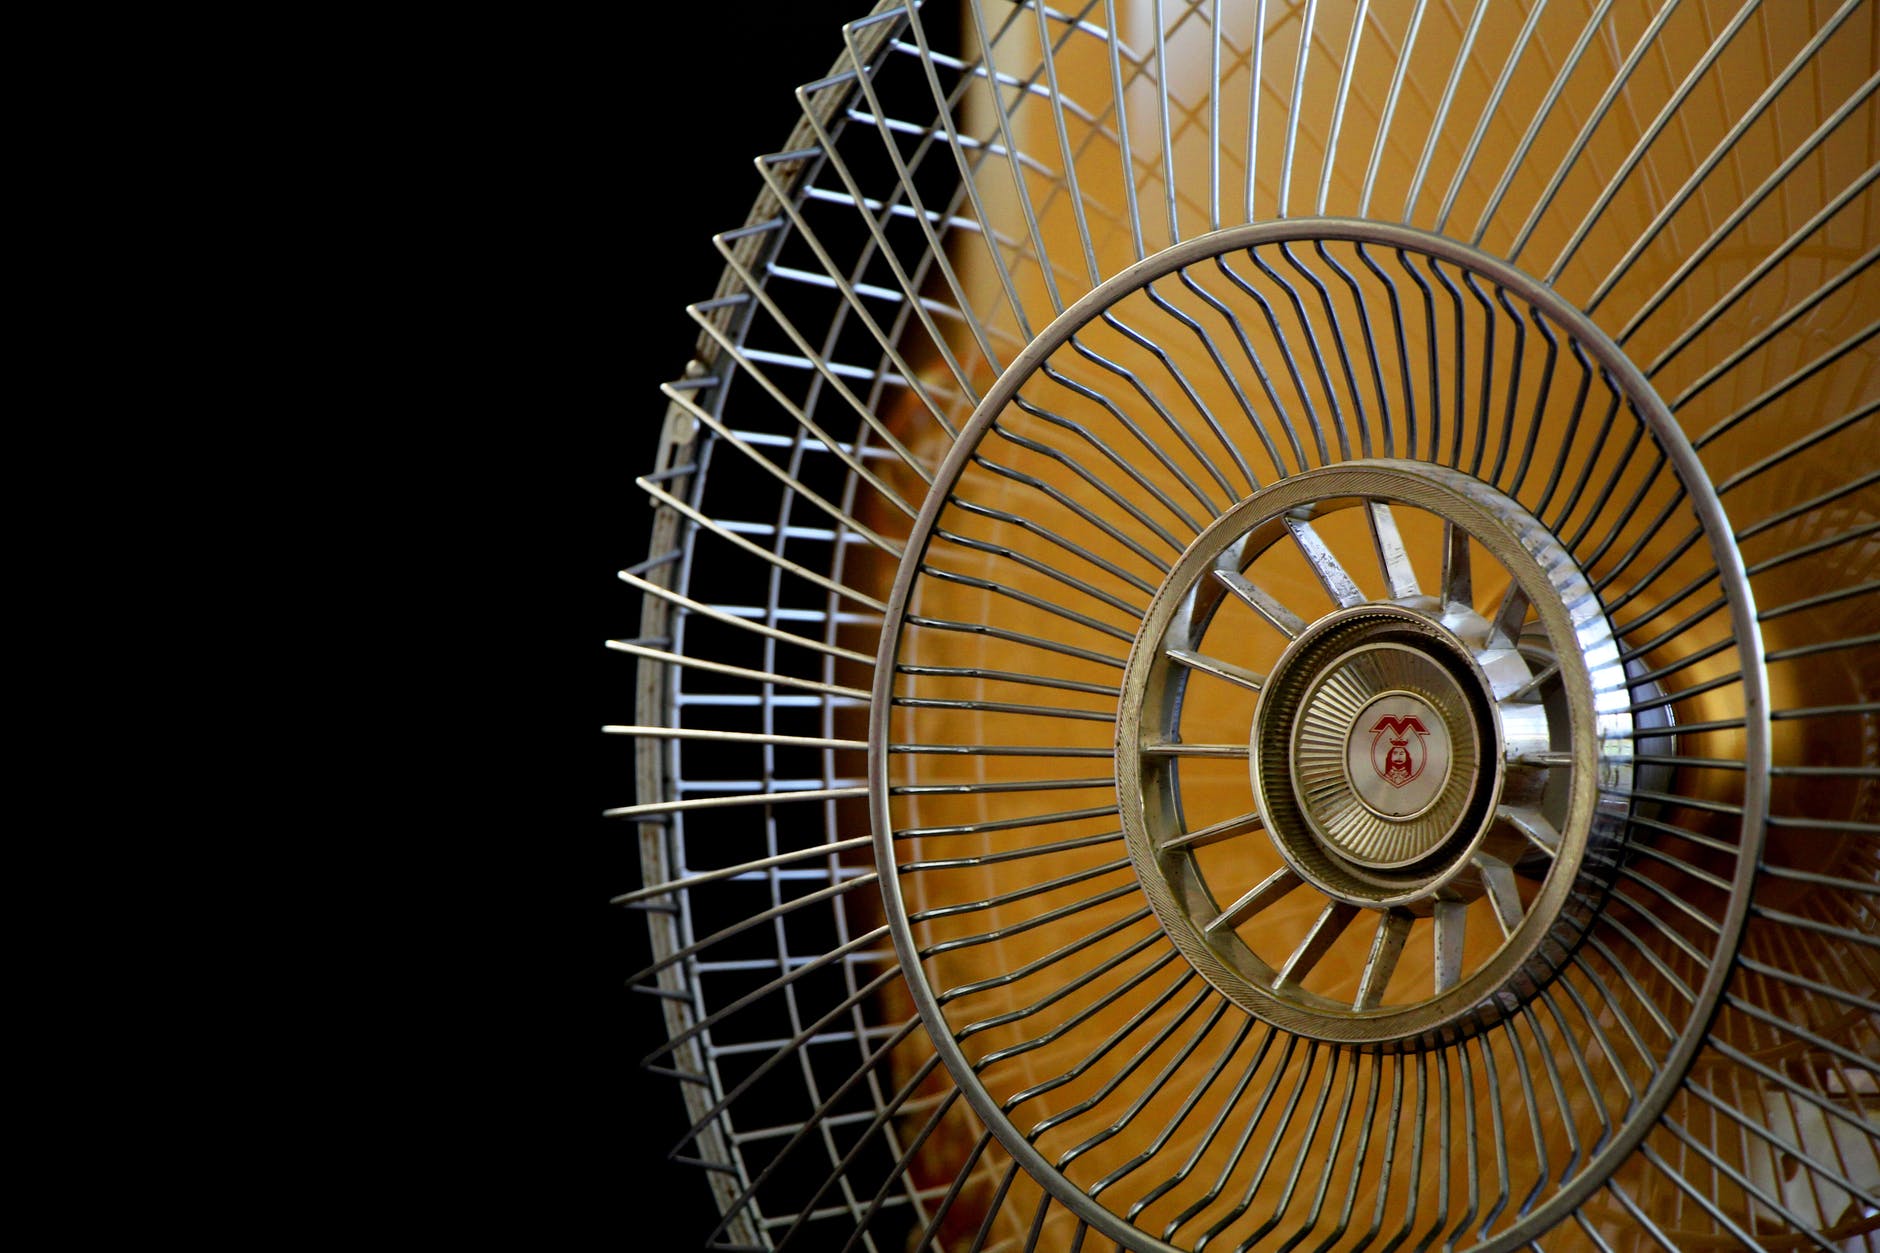 close up photography of gray stainless steel fan turned on surrounded by dark background